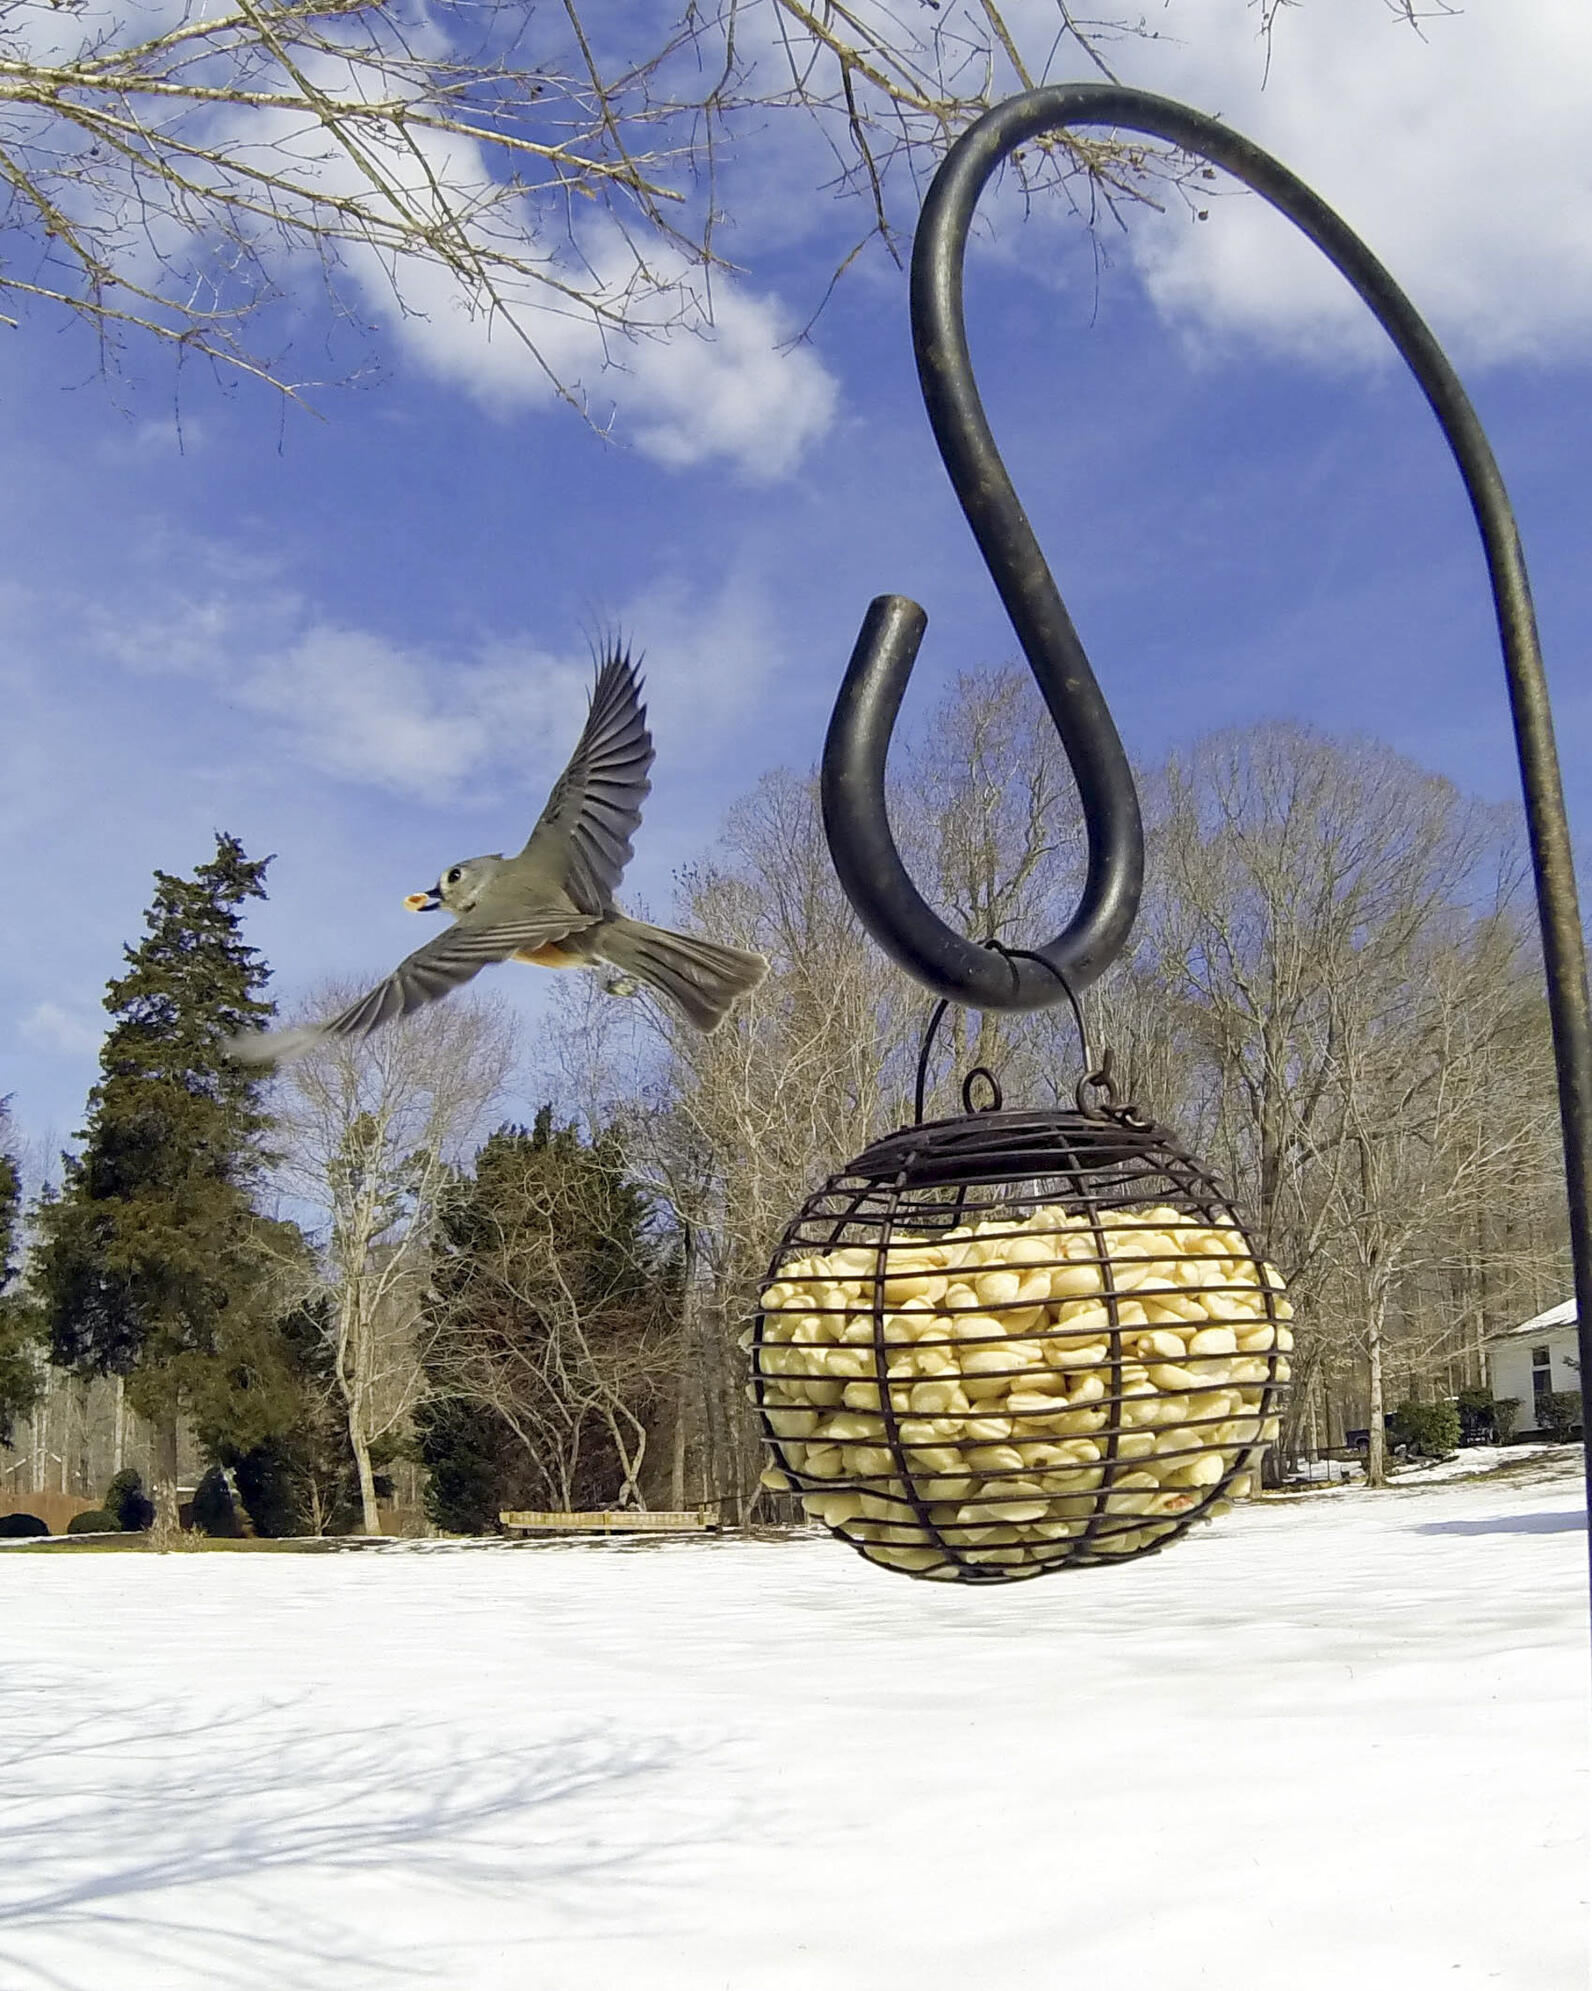 A Tufted Titmouse takes off from a ball-shaped suet feeder against a blue sky. The landscape behind is covered in snow.